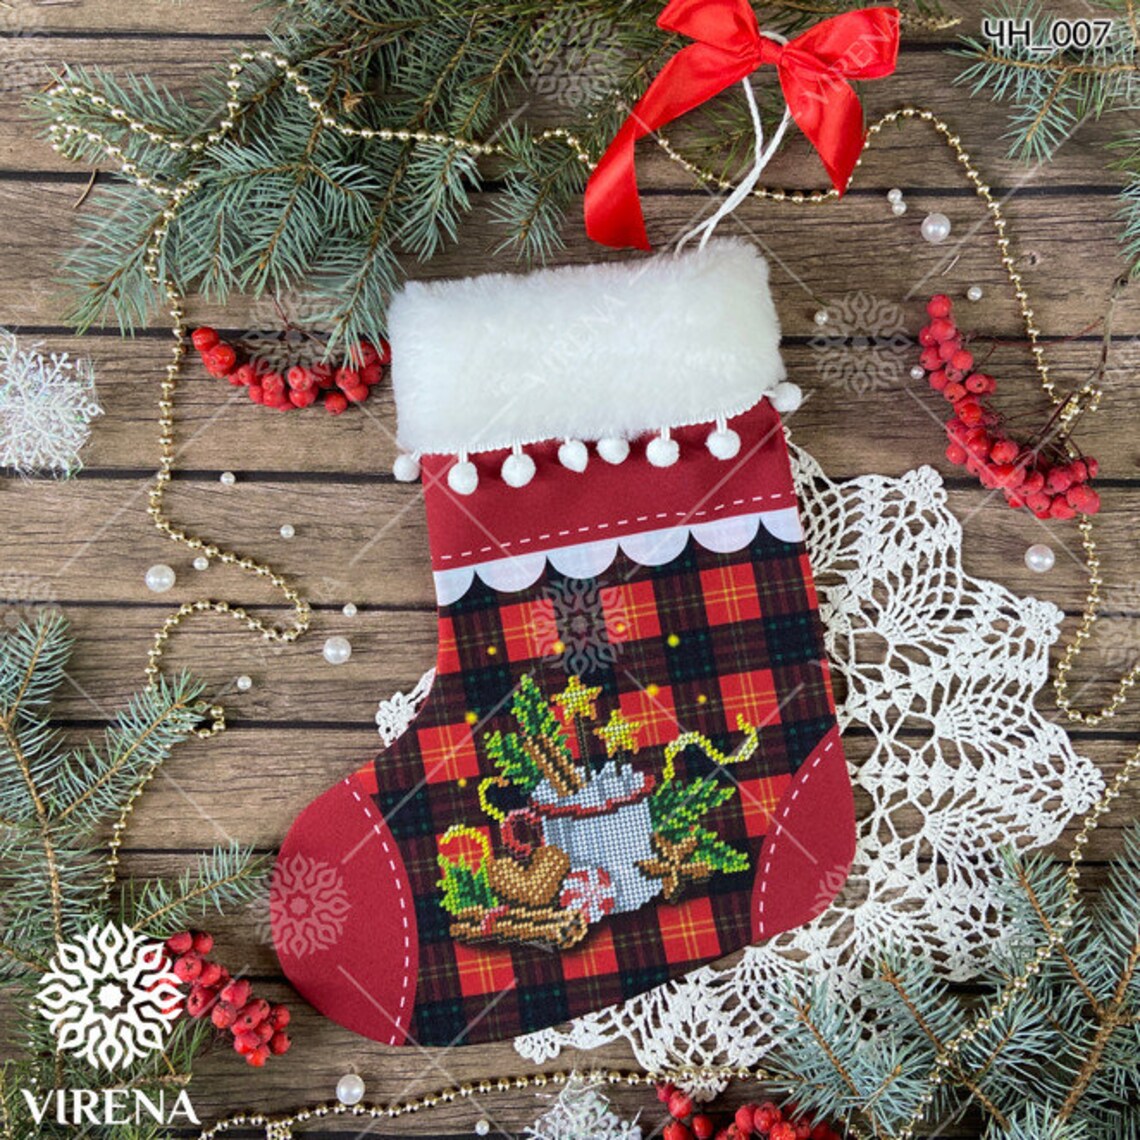 Red Christmas stocking - Beaded cross stitch picture kit